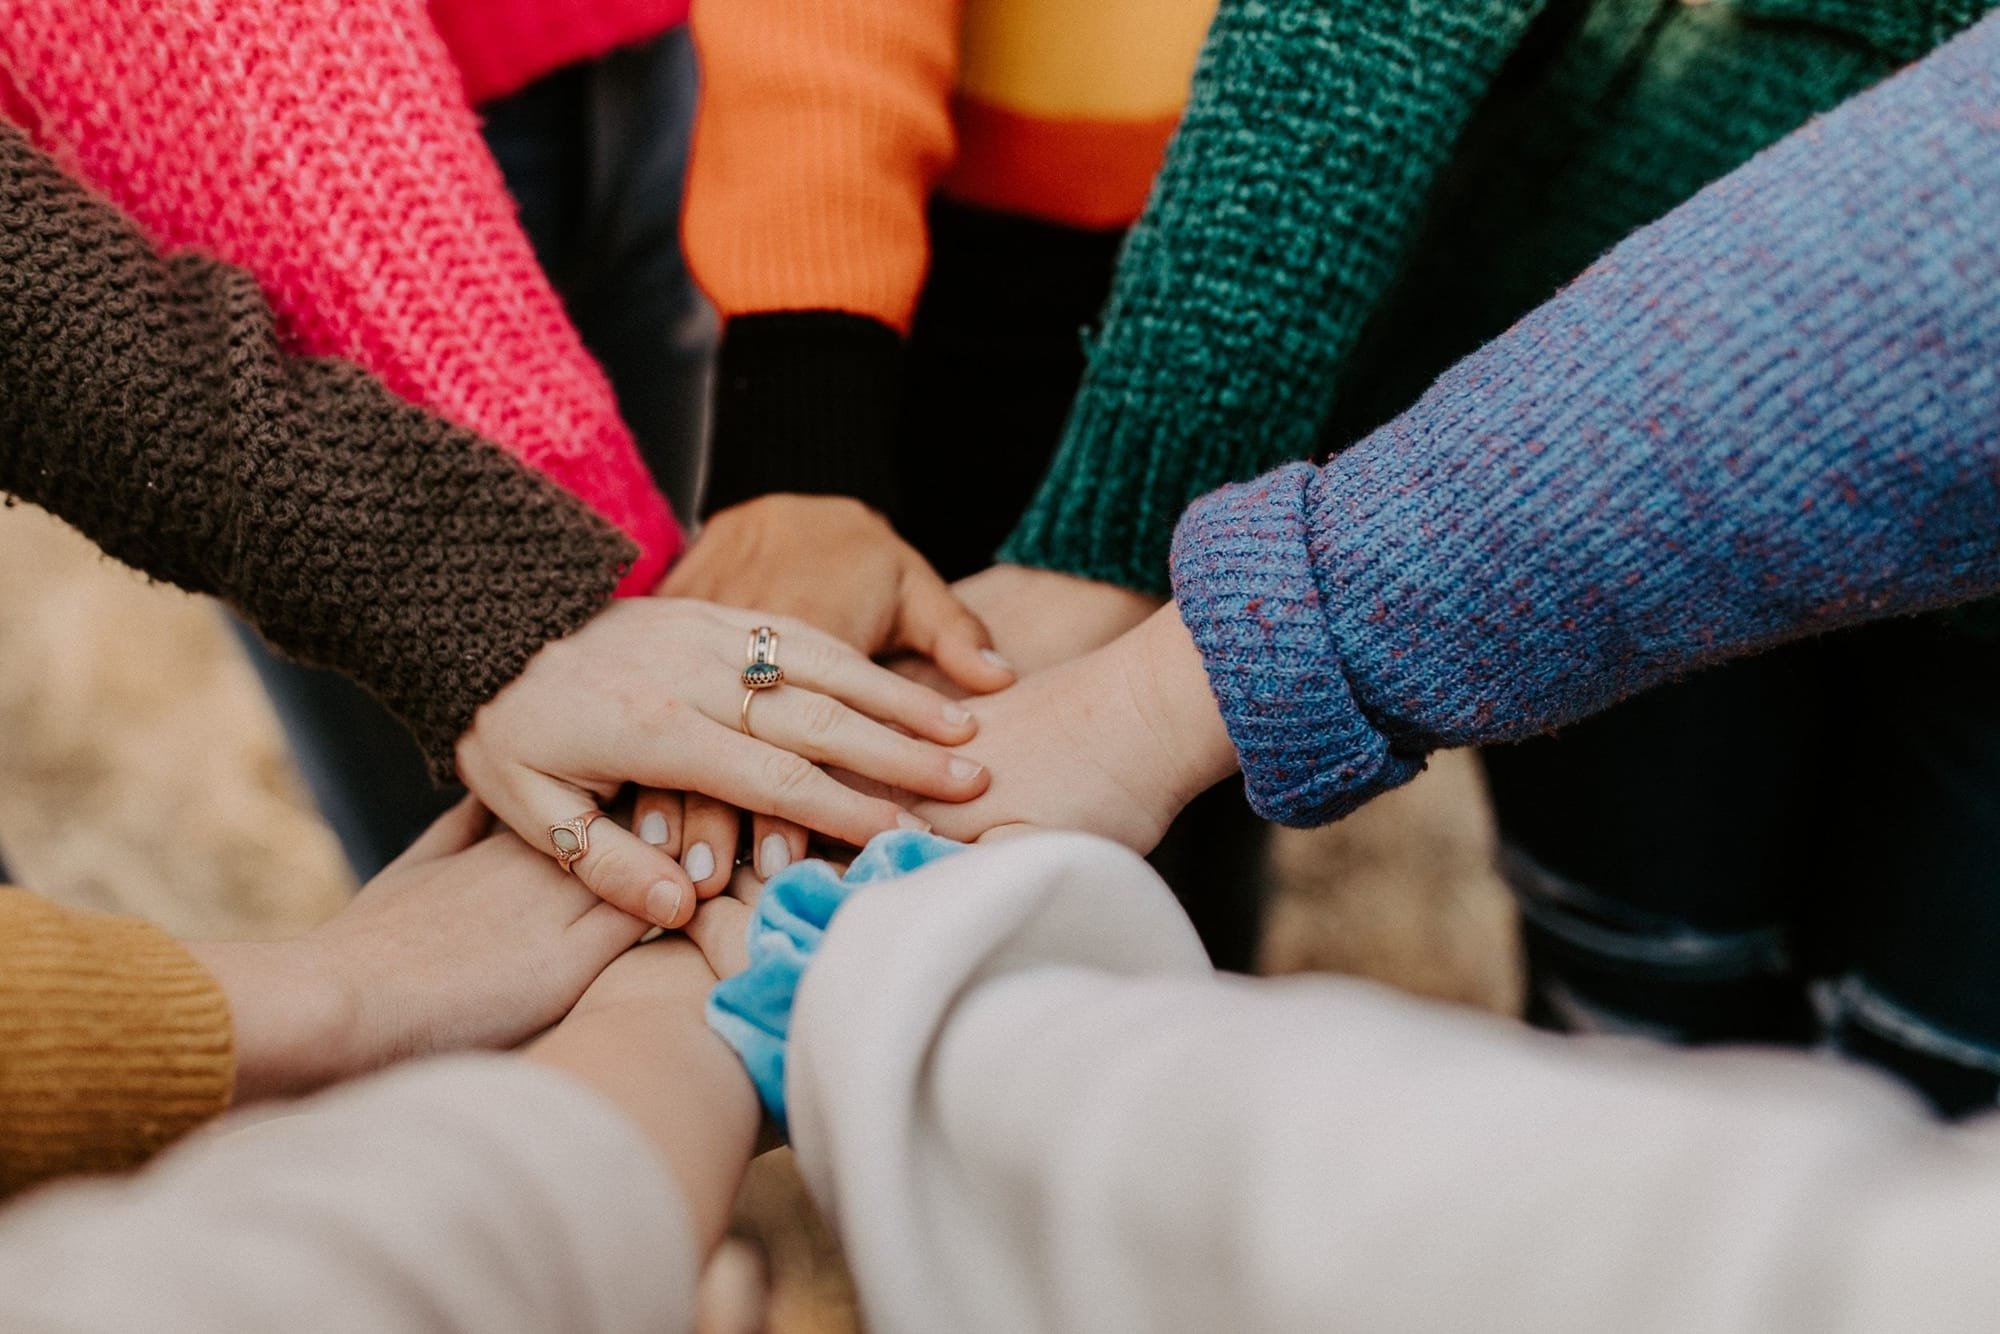 4 Powerful Ways To Build A Community Around Your Business